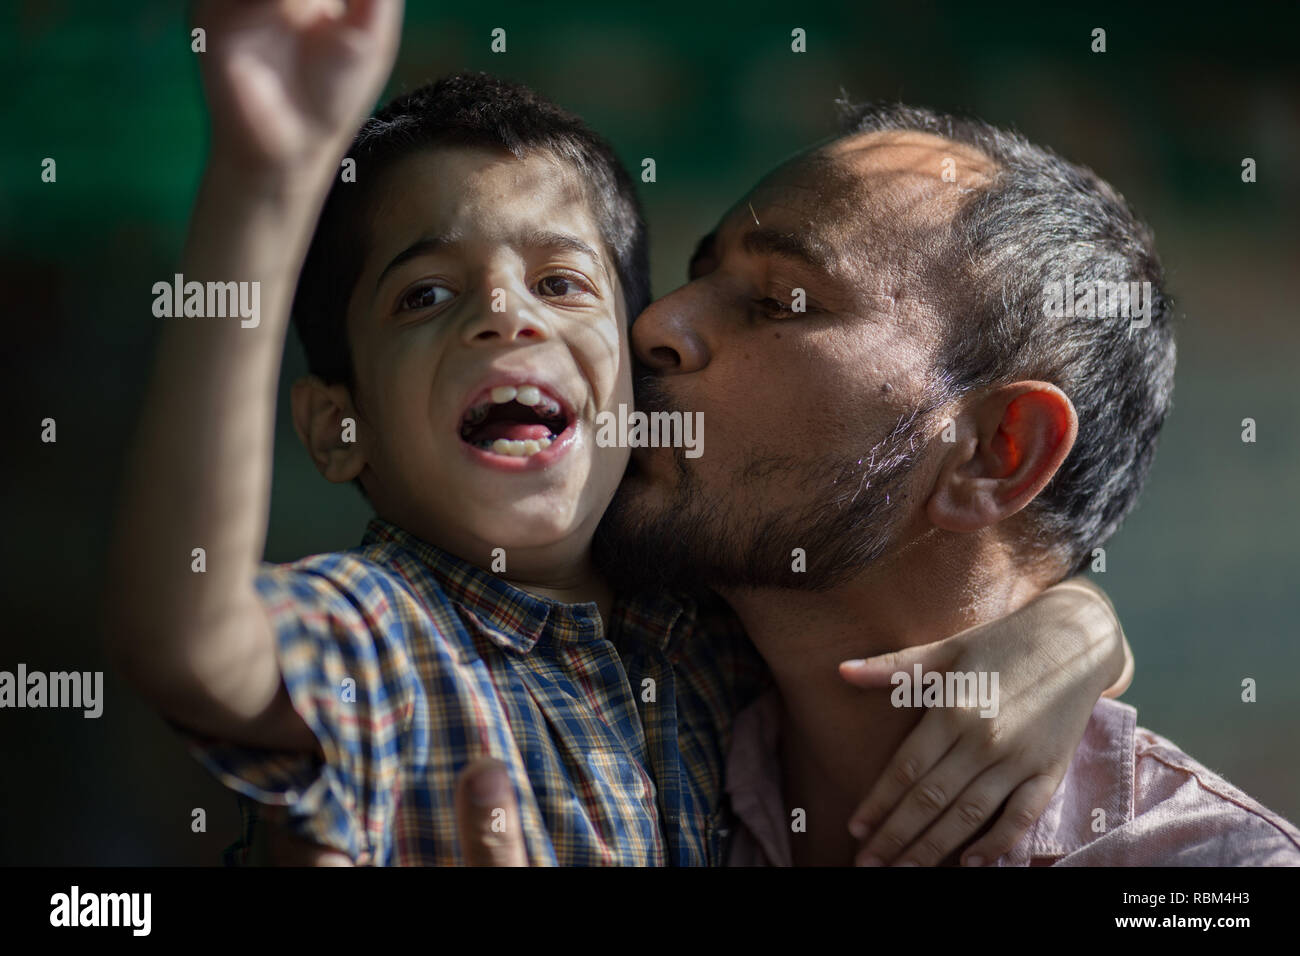 India. 26th Mar, 2017. A father seen embracing his son at Chingari Rehabilitation Center.Chingari cares for victims of the Bhopal Gas Disaster.The Bhopal Gas Disaster was a gas leak incident on the night of 2-3 December 1984 at the Union Carbide plant in Bhopal. Over 500,000 people were exposed to the toxic methyl isocyanate (MIC) gas as they slept. The final death toll is estimated to be between 15,000 and 20,000. Credit: Ryan Ashcroft/SOPA Images/ZUMA Wire/Alamy Live News Stock Photo